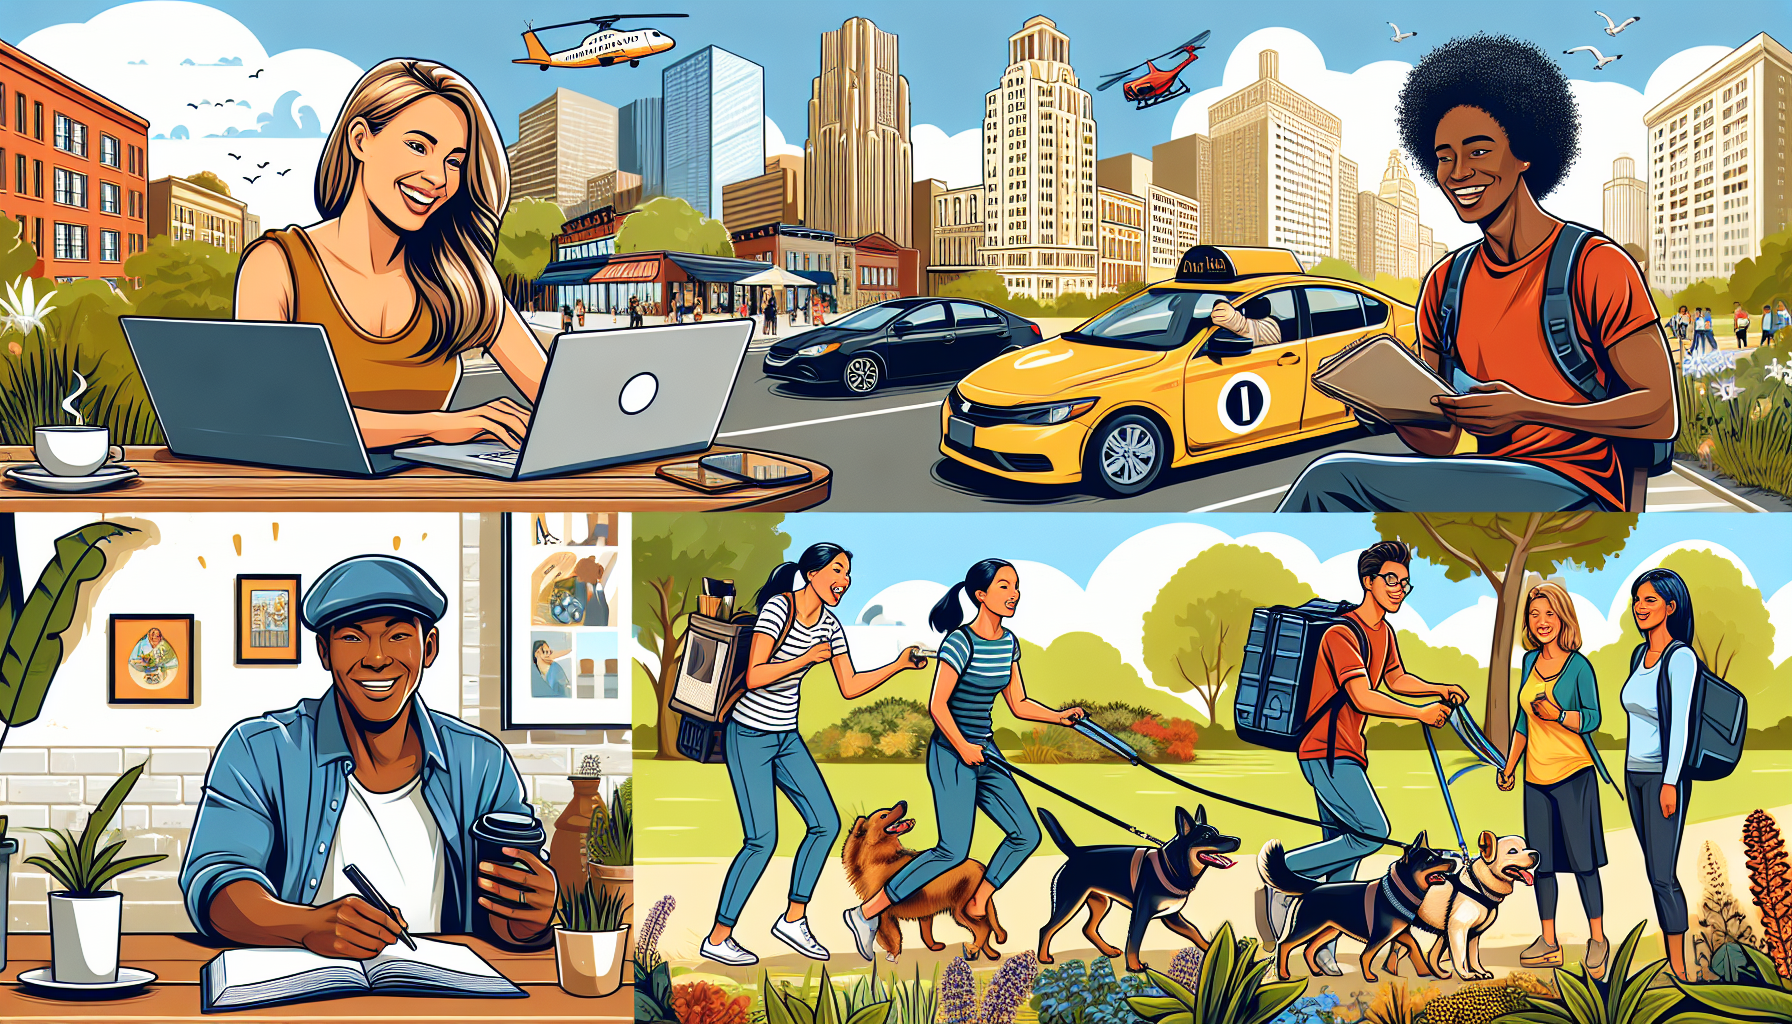 Create an image that showcases a diverse range of top side hustle jobs to boost income. Include a visually engaging scene featuring a young professional doing freelance graphic design on a laptop, another individual driving a rideshare car, someone delivering groceries, an energetic dog walker in a park, and another person taking photos with a professional camera for stock photography. The background should include various urban elements like city buildings, cafes, and parks, highlighting the flexibility and diversity of side hustles in an urban setting.